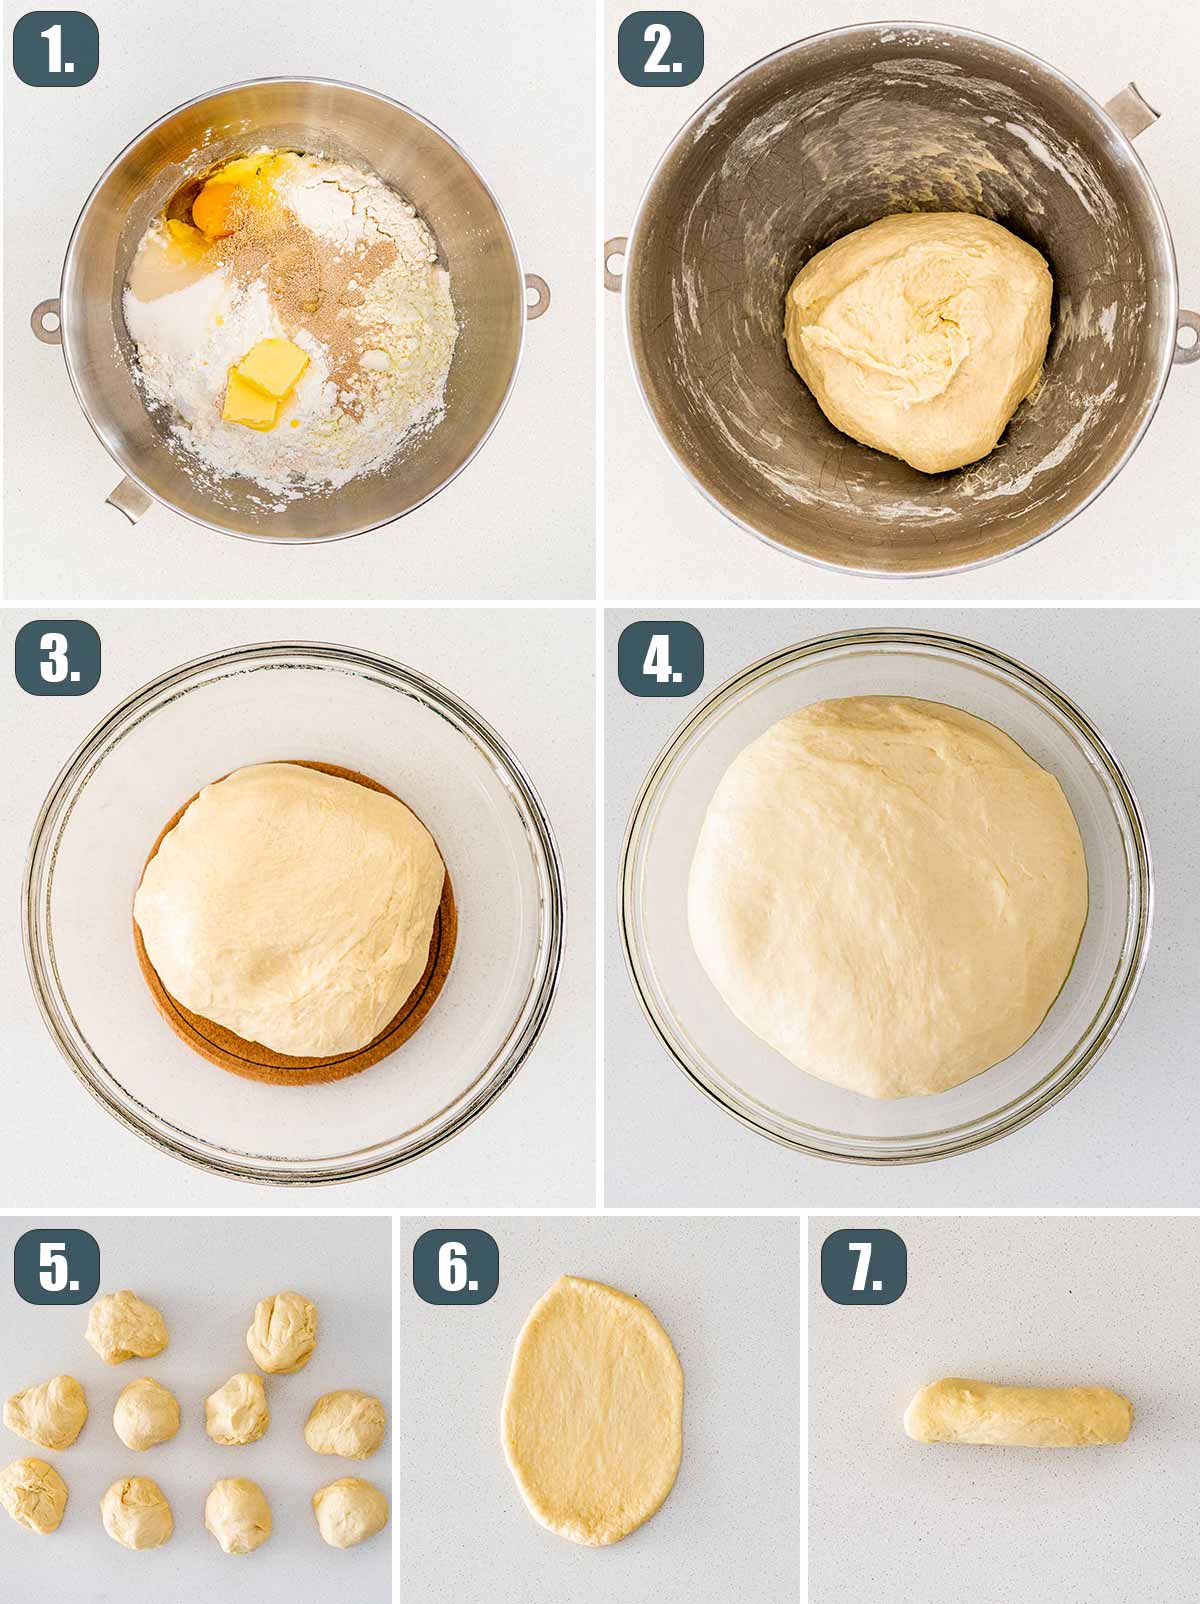 detailed process shots showing how to make dough for new england hot dog rolls.